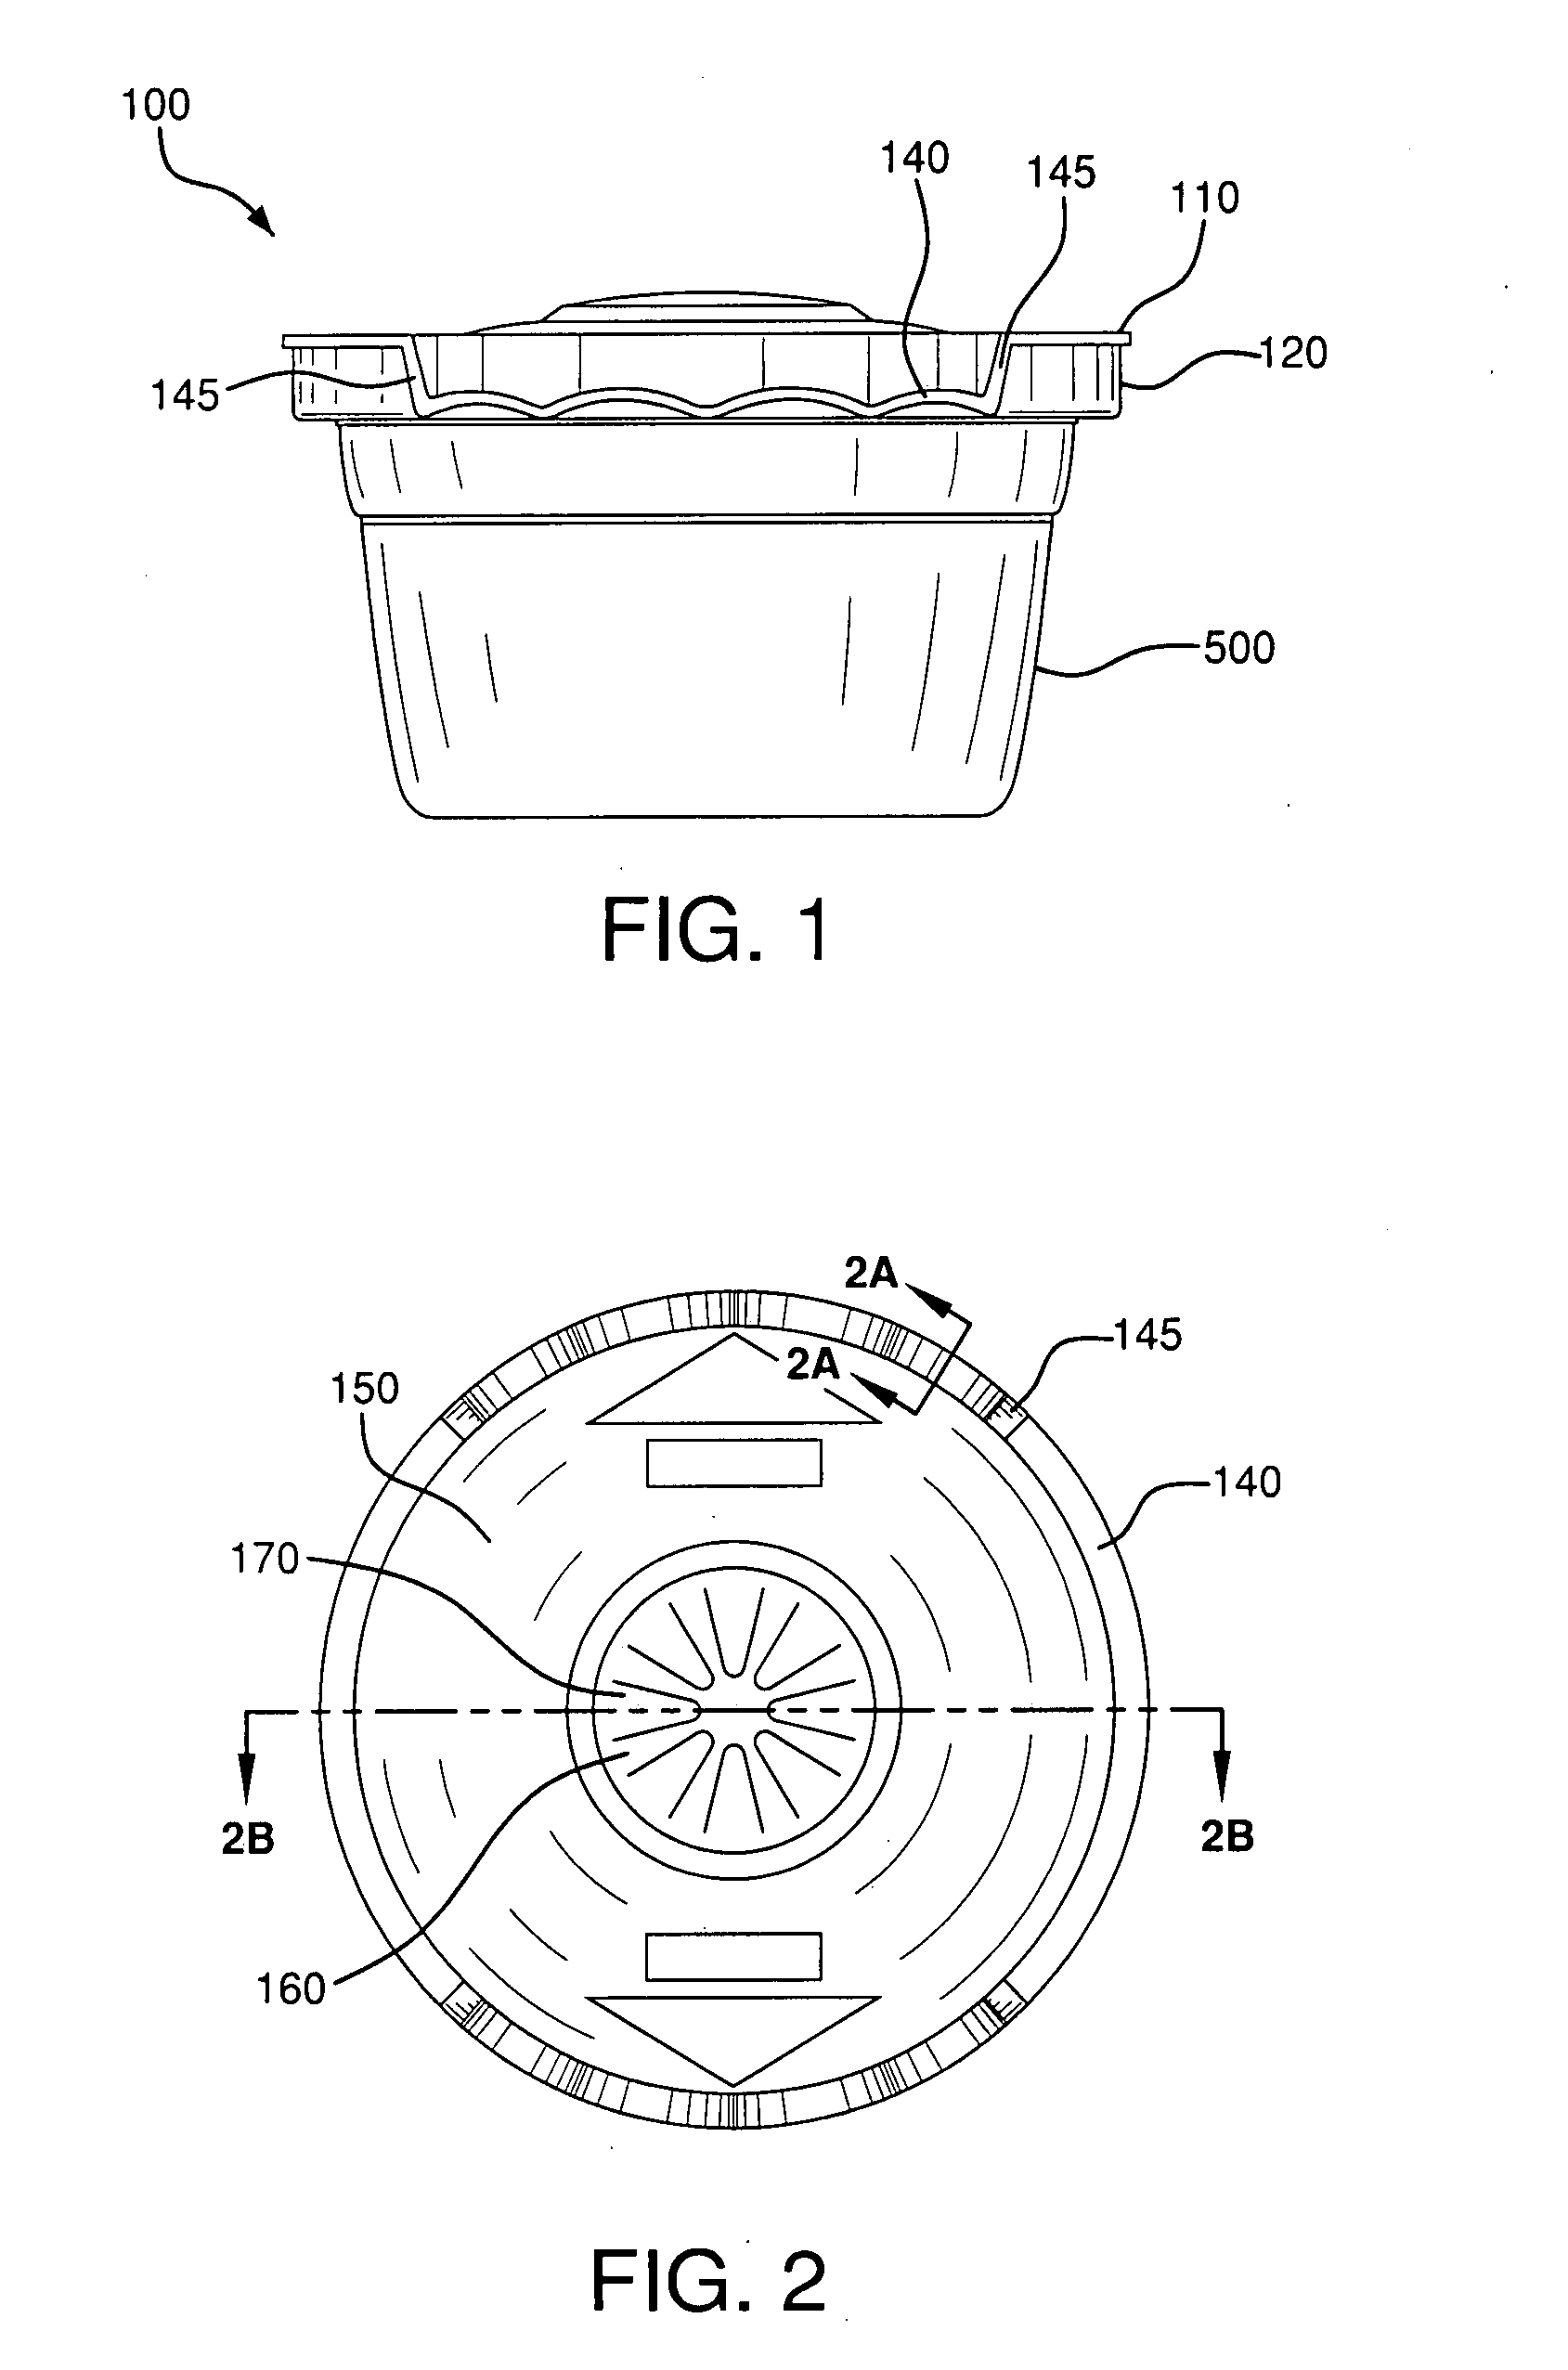 Removable locking container lid with outer skirt